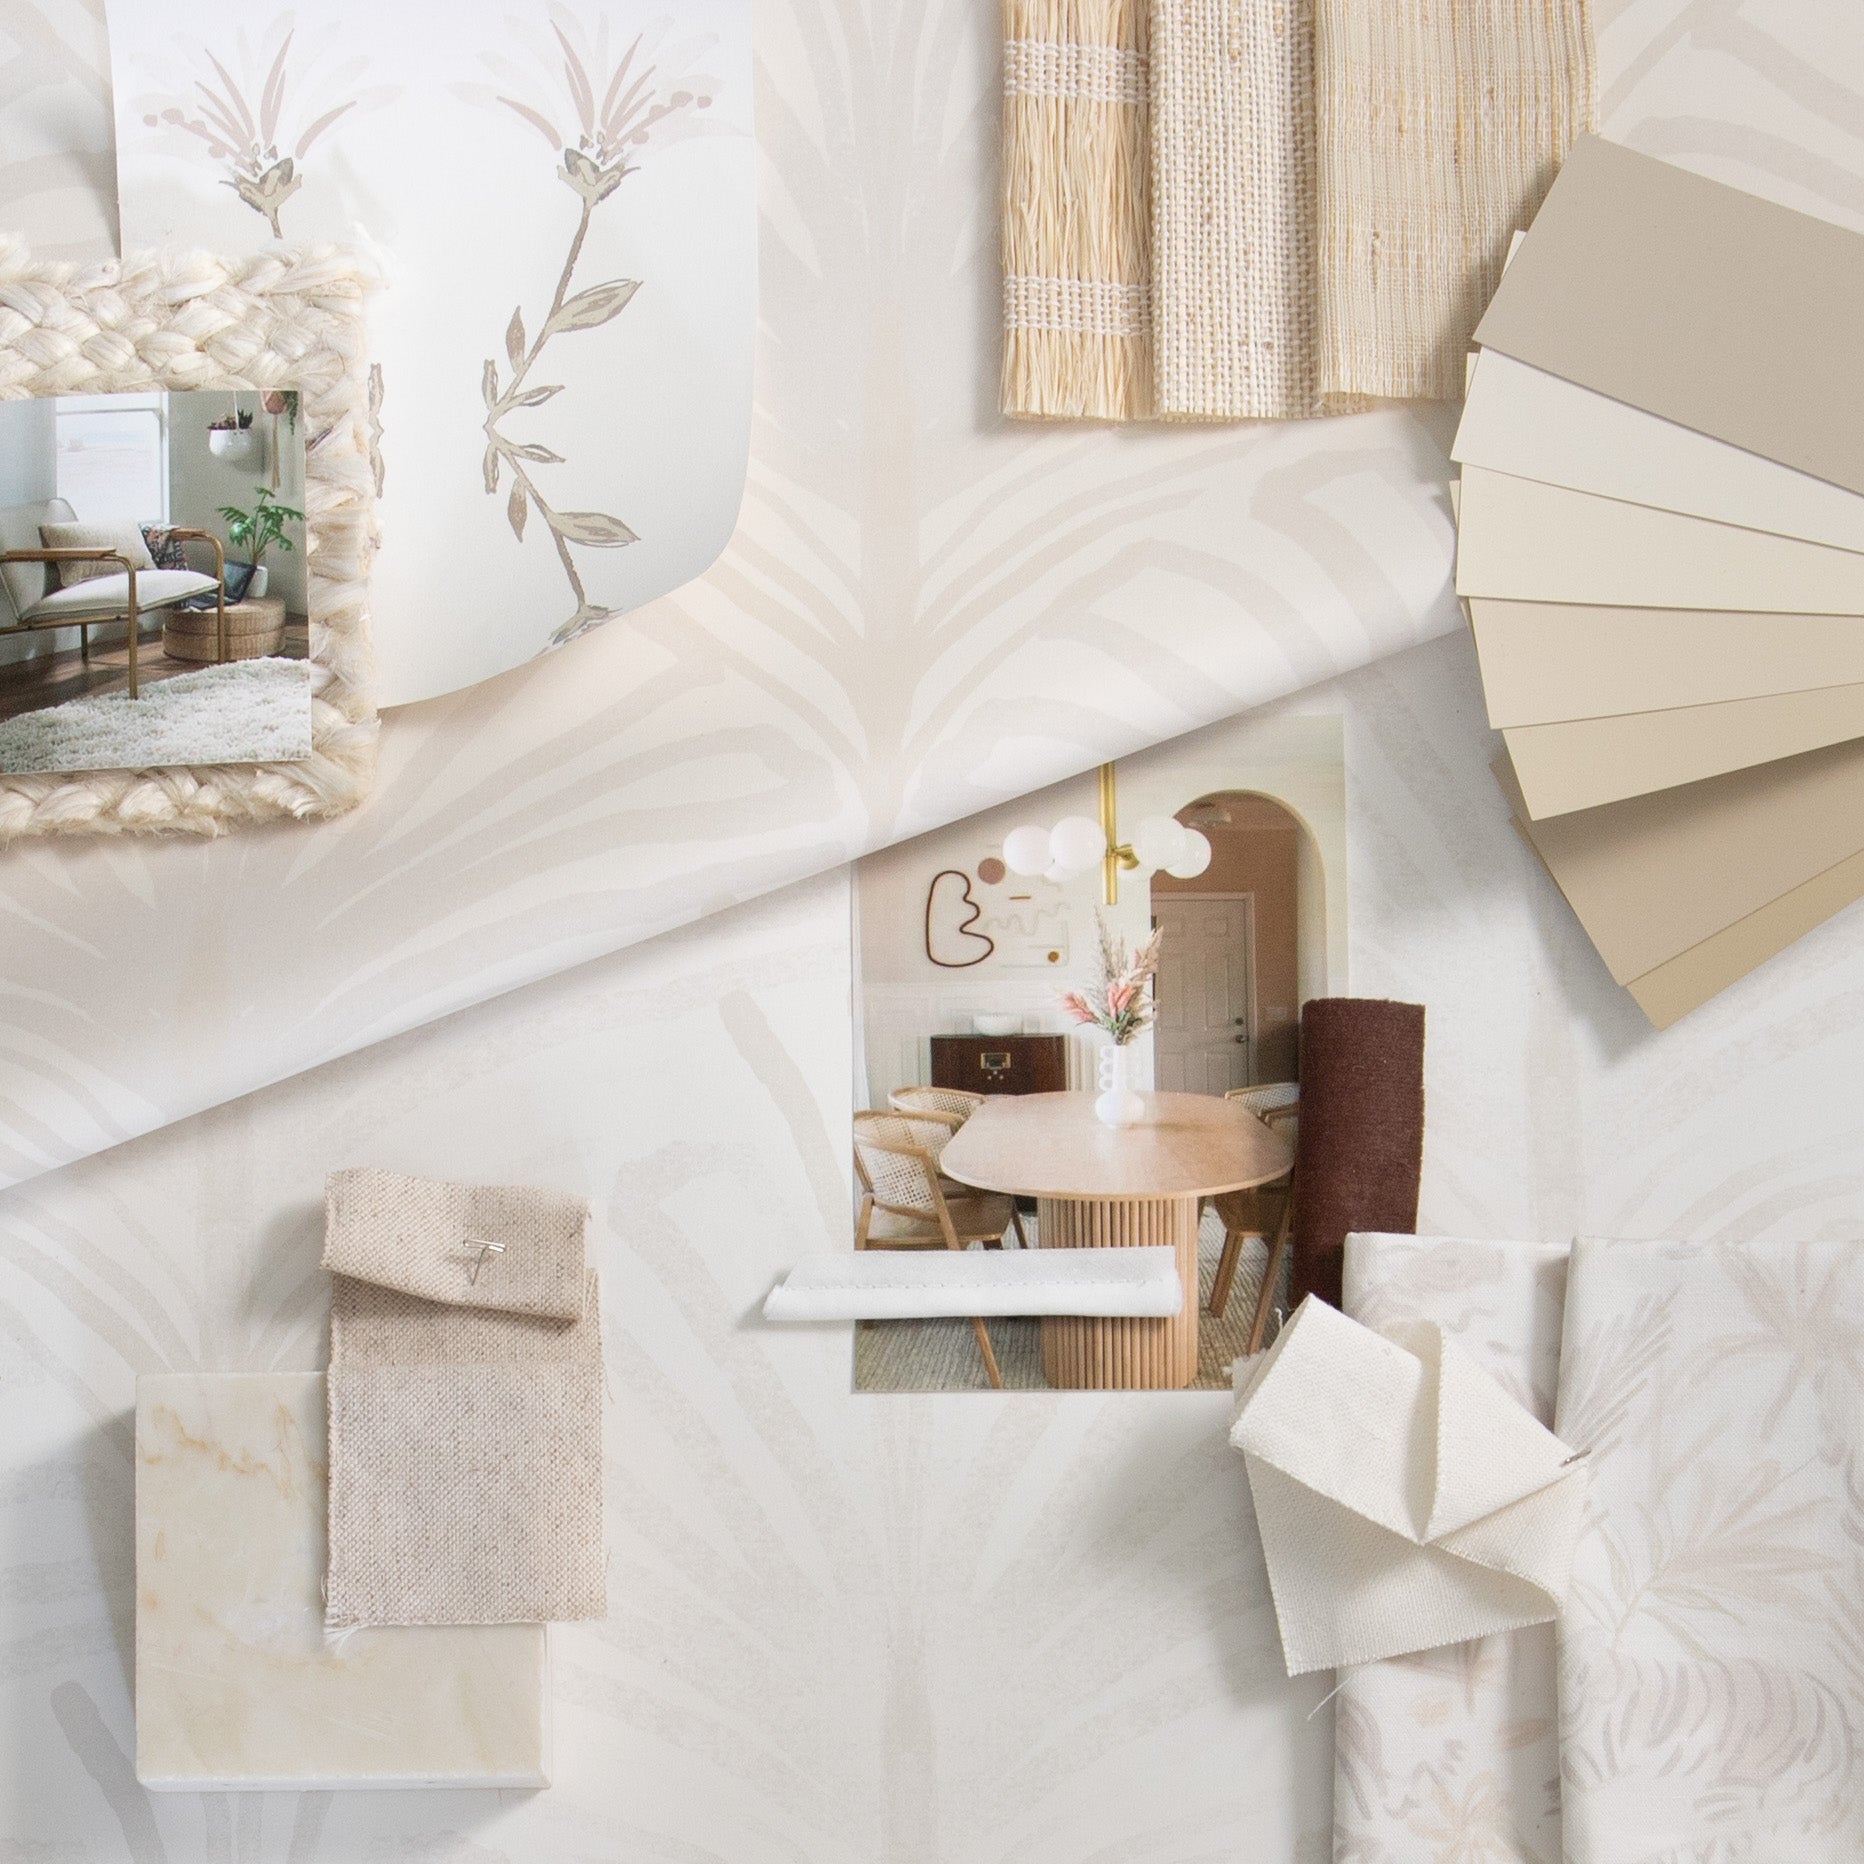 Interior design moodboard and fabric inspirations with Natural White Linen Swatch, Beige Botanical Stripe Printed Swatch, Linen Oat Swatch, and Beige Chinoiserie Tiger Printed Swatch